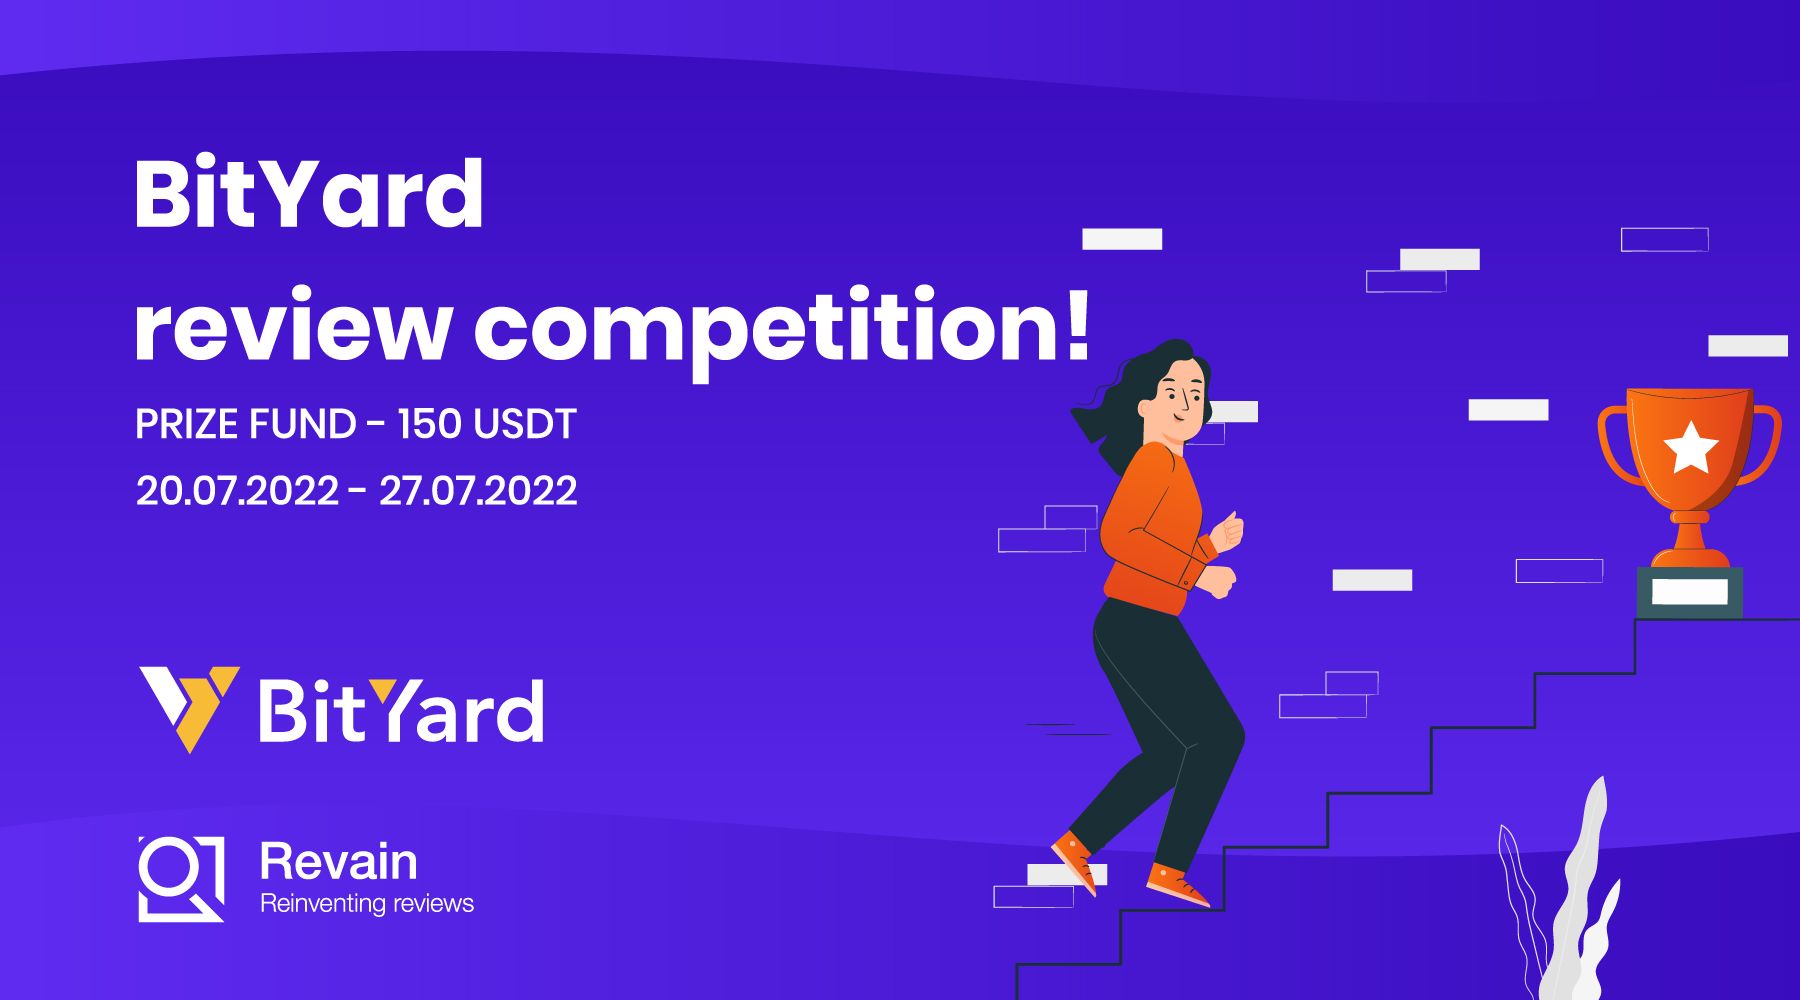 BitYard review competition with generous prizes has already started!